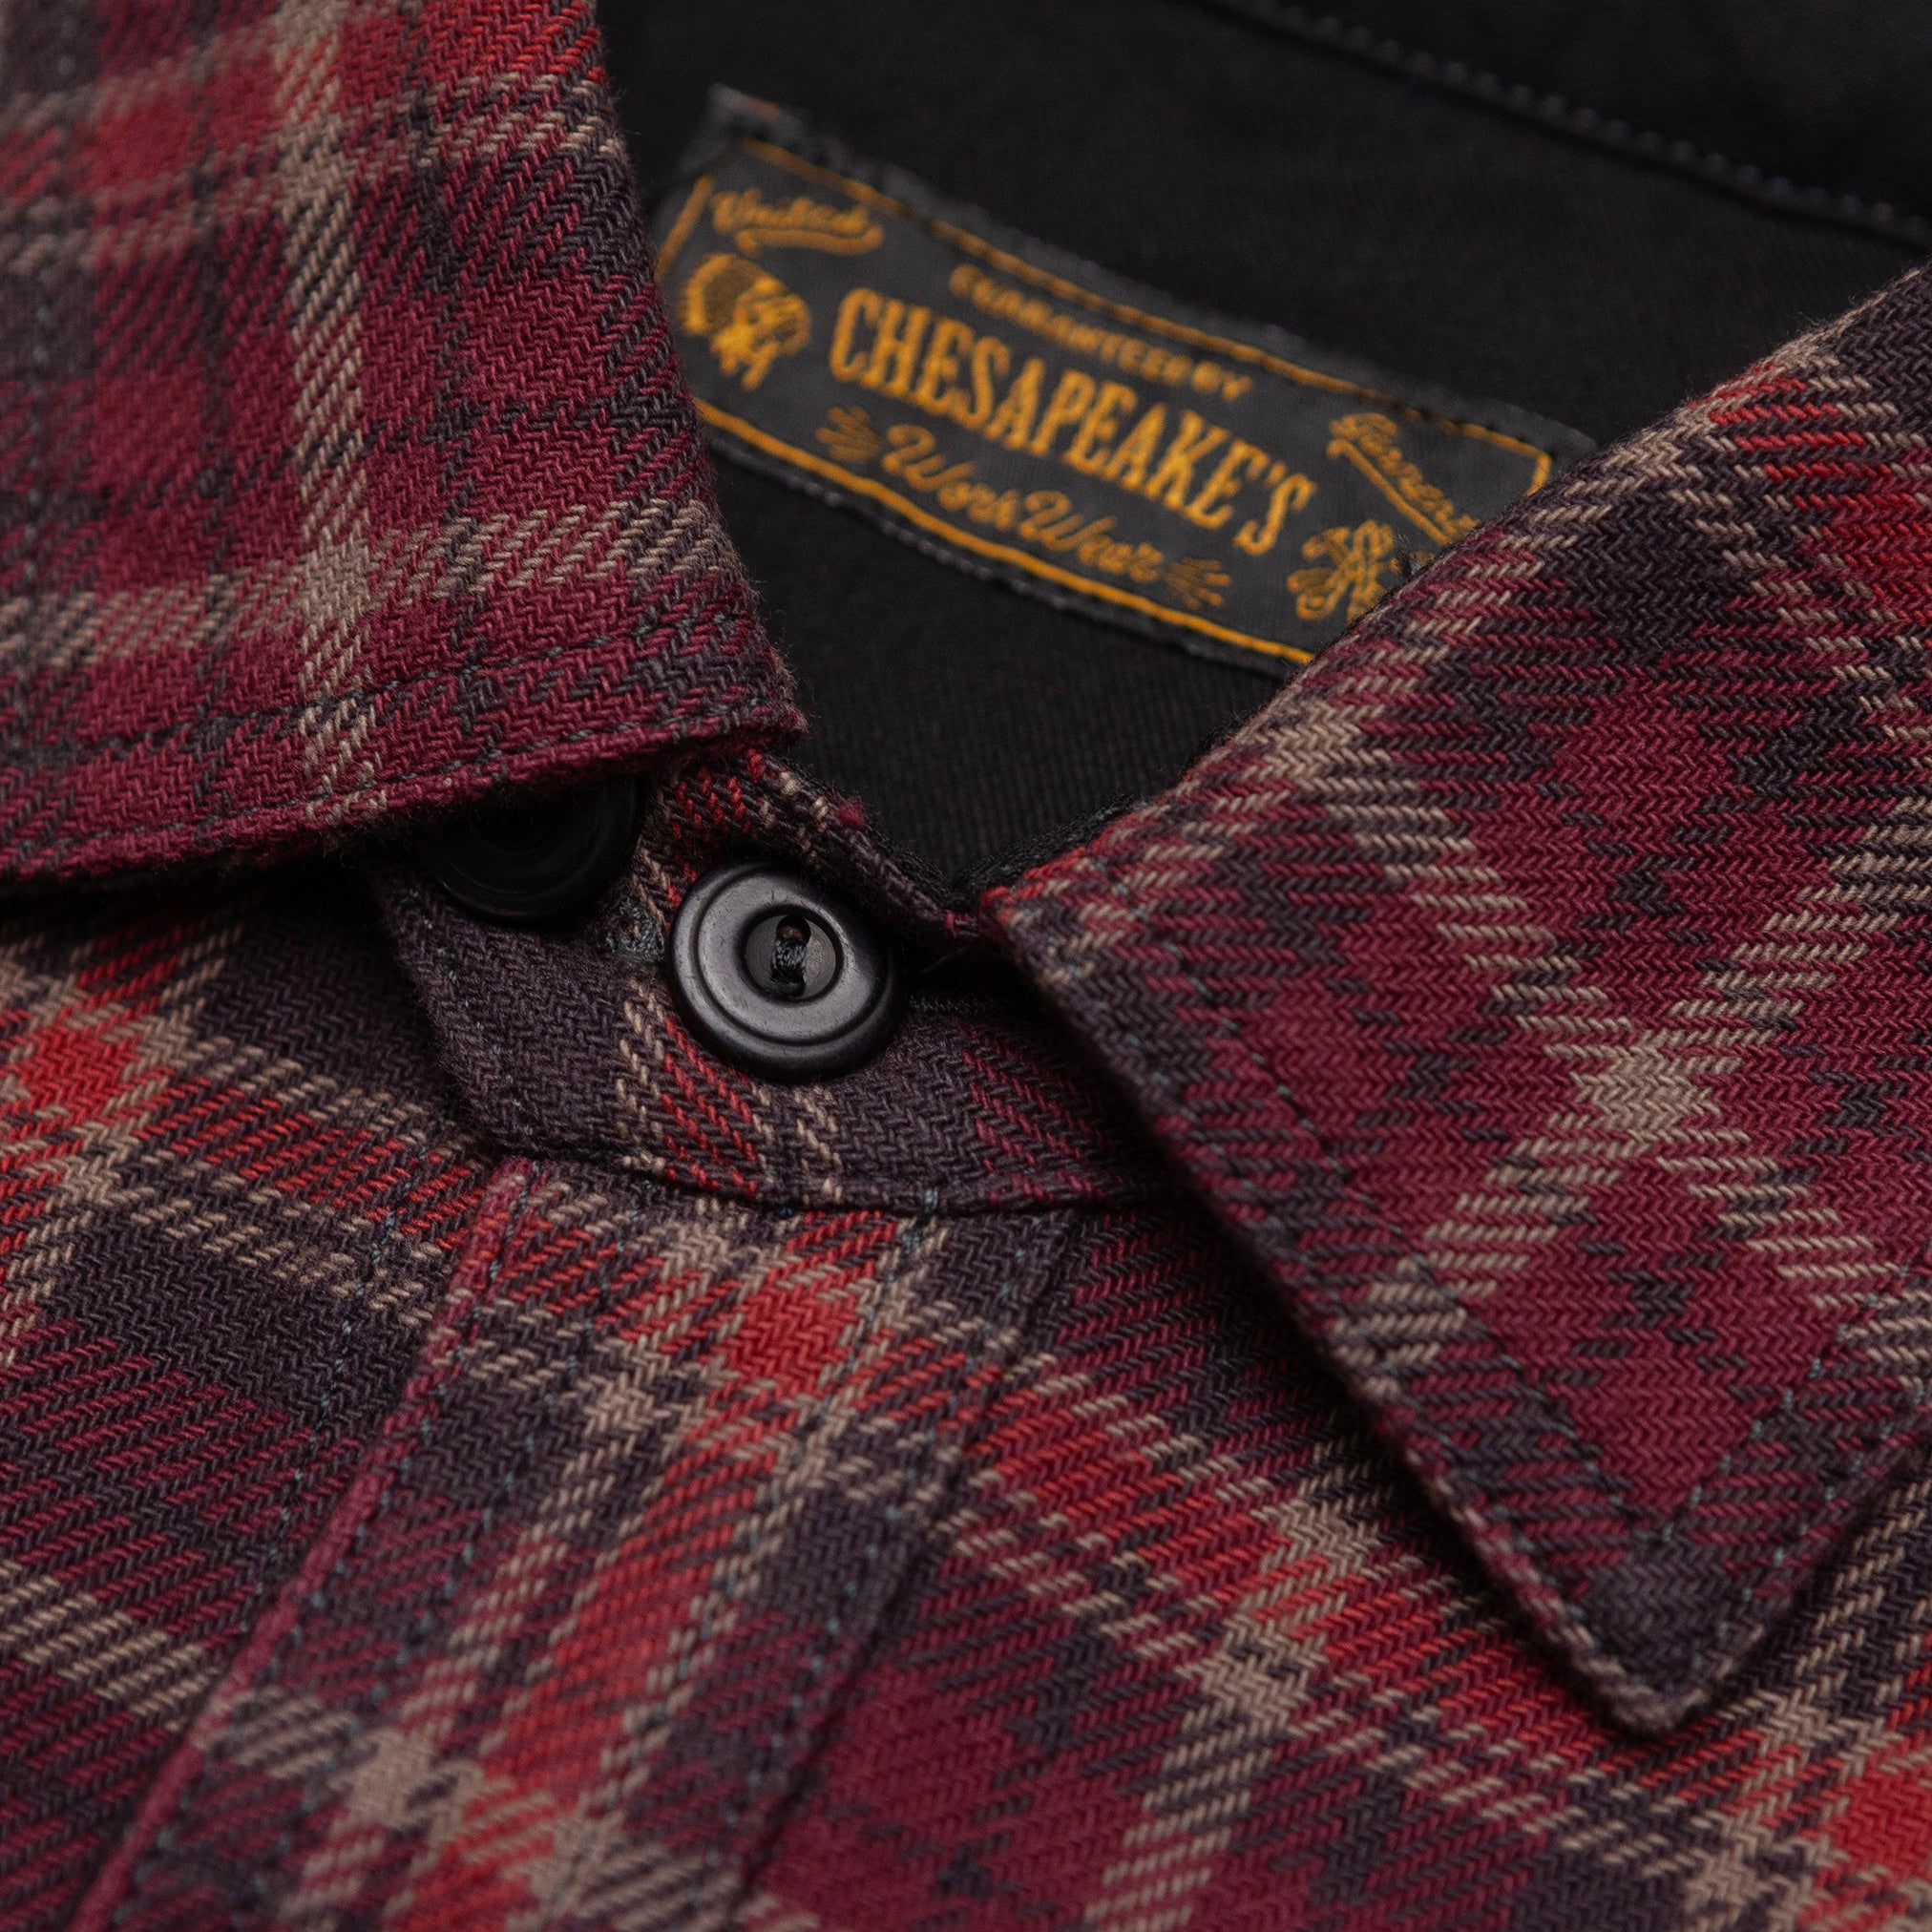 The Utility Shirt in Deep Red Plaid